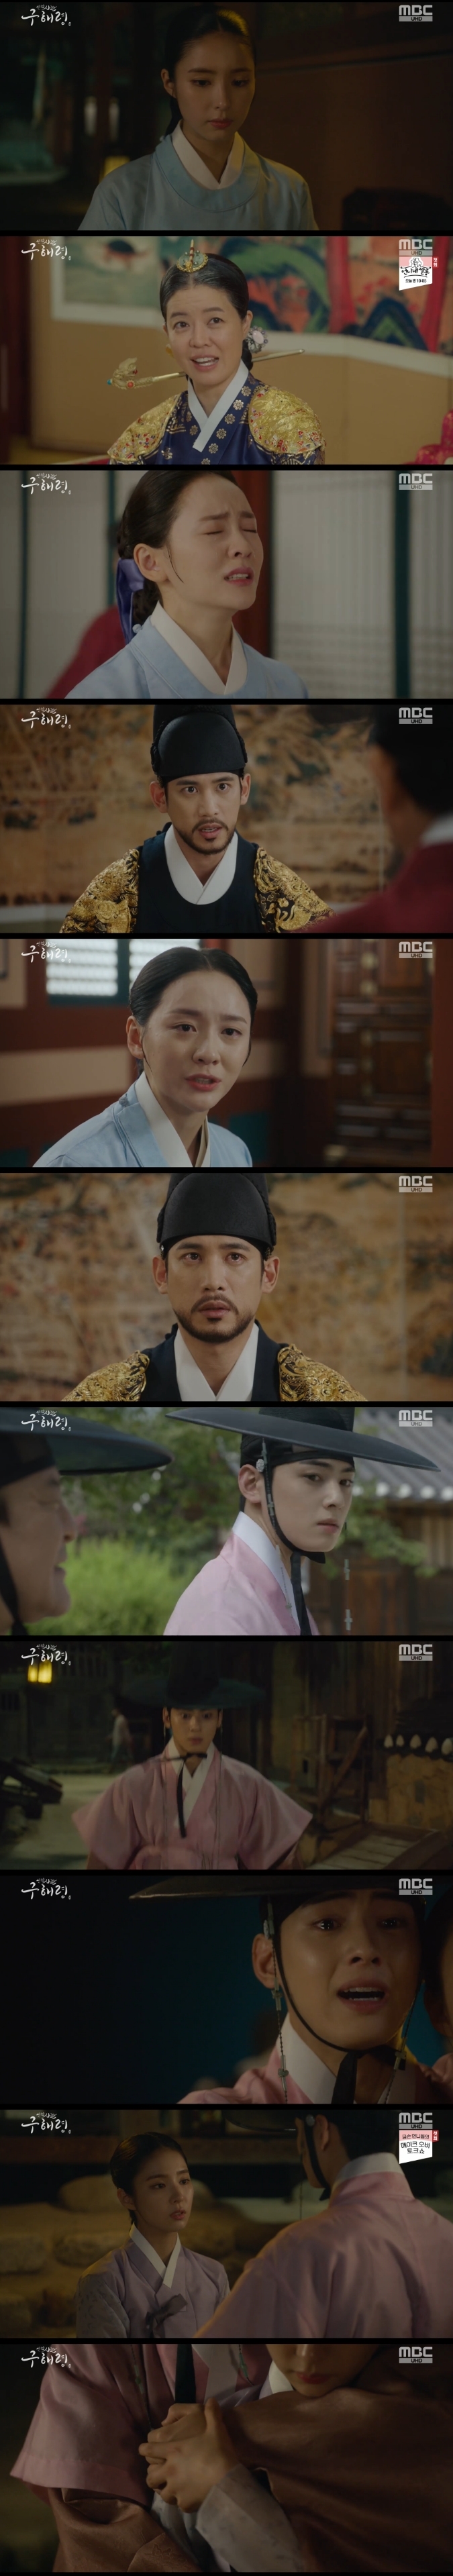 Newcomer Rookie Historian Goo Hae-ryung Shin Se-kyung and Cha Eun-woo continued their heartbreaking love.In the MBC drama The New Entrepreneur Rookie Historian Goo Hae-ryung (directed by Kang Il-soo Han Hyun-hee, the playwright Kim Ho-soo), which was broadcast on the 5th night, the appearance of Rookie Historian Goo Hae-ryung (Shin Se-kyung), who finally rejected Lee Lims mind, was broadcast.Lee asked Cho (Kim Yeo-jin) to collect the house order, but he was rejected. Lee said, I will tell Rookie Historian Goo Hae-ryung what I am after.Rookie Historian Goo Hae-ryung said: Im telling you, I dont want to live as a couple in the ear, I dont want to be there.Min Woo-won (Lee Ji-hoon) told Rookie Historian Goo Hae-ryung: From today, go to the old Kwonji as a contrast.Please take charge of the ceremonial record of Sejo of Joseon.Rookie Historian Goo Hae-ryung saw the eldest daughter of Sobaek Sun, who had been contrasting since the first house.Rookie Historian Goo Hae-ryung was suffering from drinking alone every night he returned from his entrance examination at the house.Song Sa-hee (Park Ji-hyun) went to see the left-wing court in anger at the fact that he suddenly heard at Samgantaek. Song Sa-hee asked, What happened?Song asked for the fact to be withdrawn, but the left-handed person said, You came to me to be my family. I decide how to use it.The news was told by the tax collector (Park Ki-woong) as if to push Song Sa-hee: I wanted Choices rights, not what I wanted. Do you really think I got what I wanted?My life is not mine. How miserable my heart is to realize it. Irim was struggling to imagine the future with Rookie Historian Goo Hae-ryung.Lee did not control the mind of Rookie Historian Goo Hae-ryung and went to Rookie Historian Goo Hae-ryung.But Rookie Historian Goo Hae-ryung said go back: Irim hugged such Rookie Historian Goo Hae-ryung from behind.Irim said, Ill throw it away, if you dont want to live as the wife of Sejo of Joseon, Ill do it. Im not Sejo of Joseon.I can throw it away, Irim said. Lets go somewhere where no one knows.Rookie Historian Goo Hae-ryung said: Reality is not a novel; it may be a beautiful ending in a novel, but reality is different.We will be tired and tired as time goes by, and we will be tired and tired and someday we will hate each other and regret the Choices of this day. The two separated secretly shed tears.=